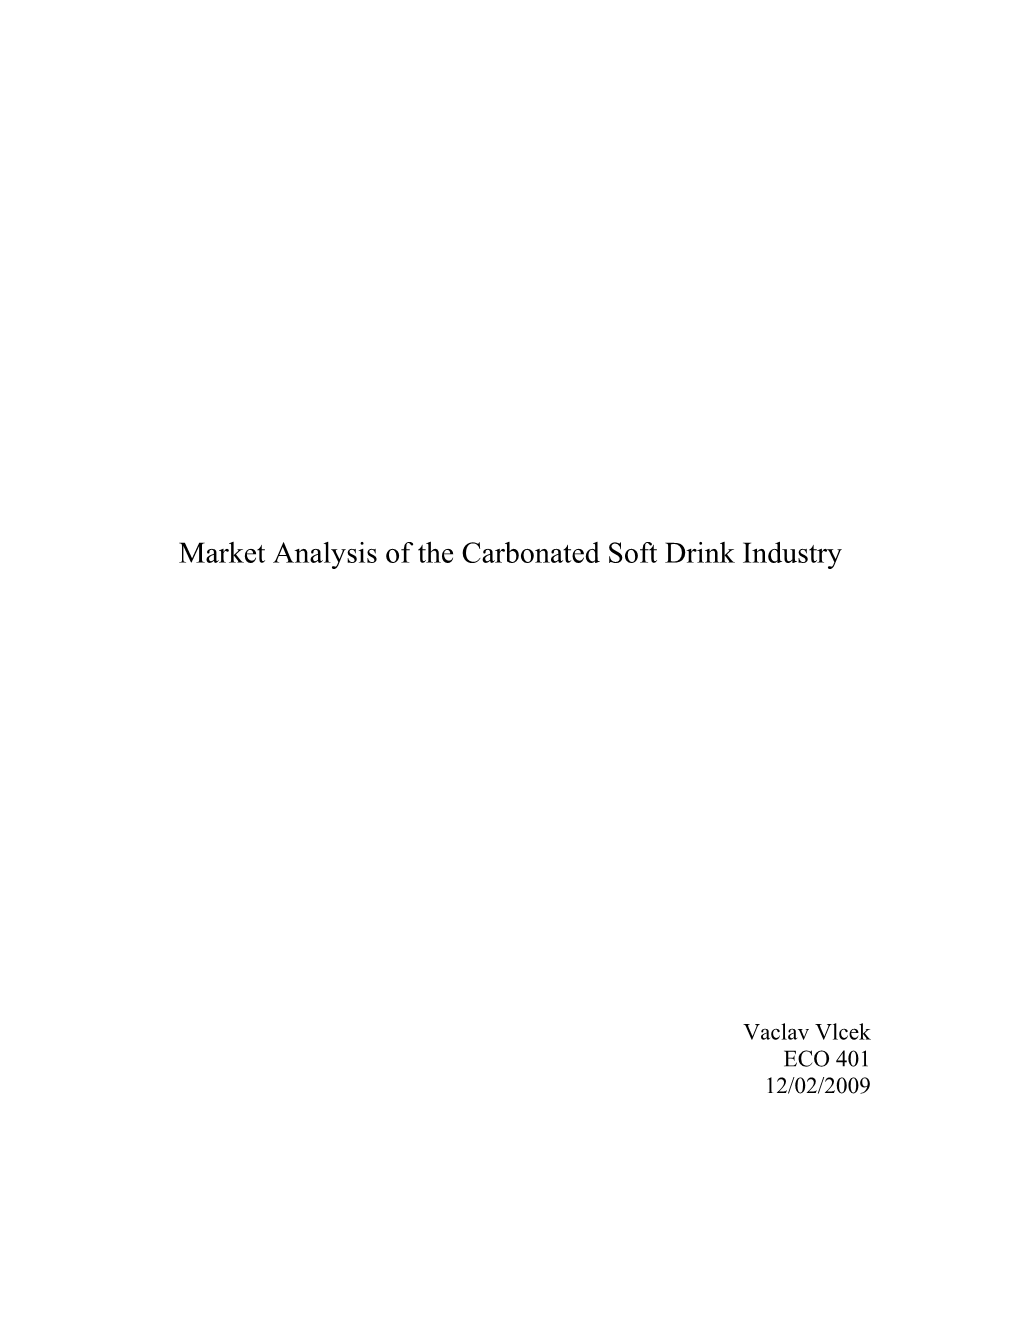 Market Analysis of the Carbonated Soft Drink Industry